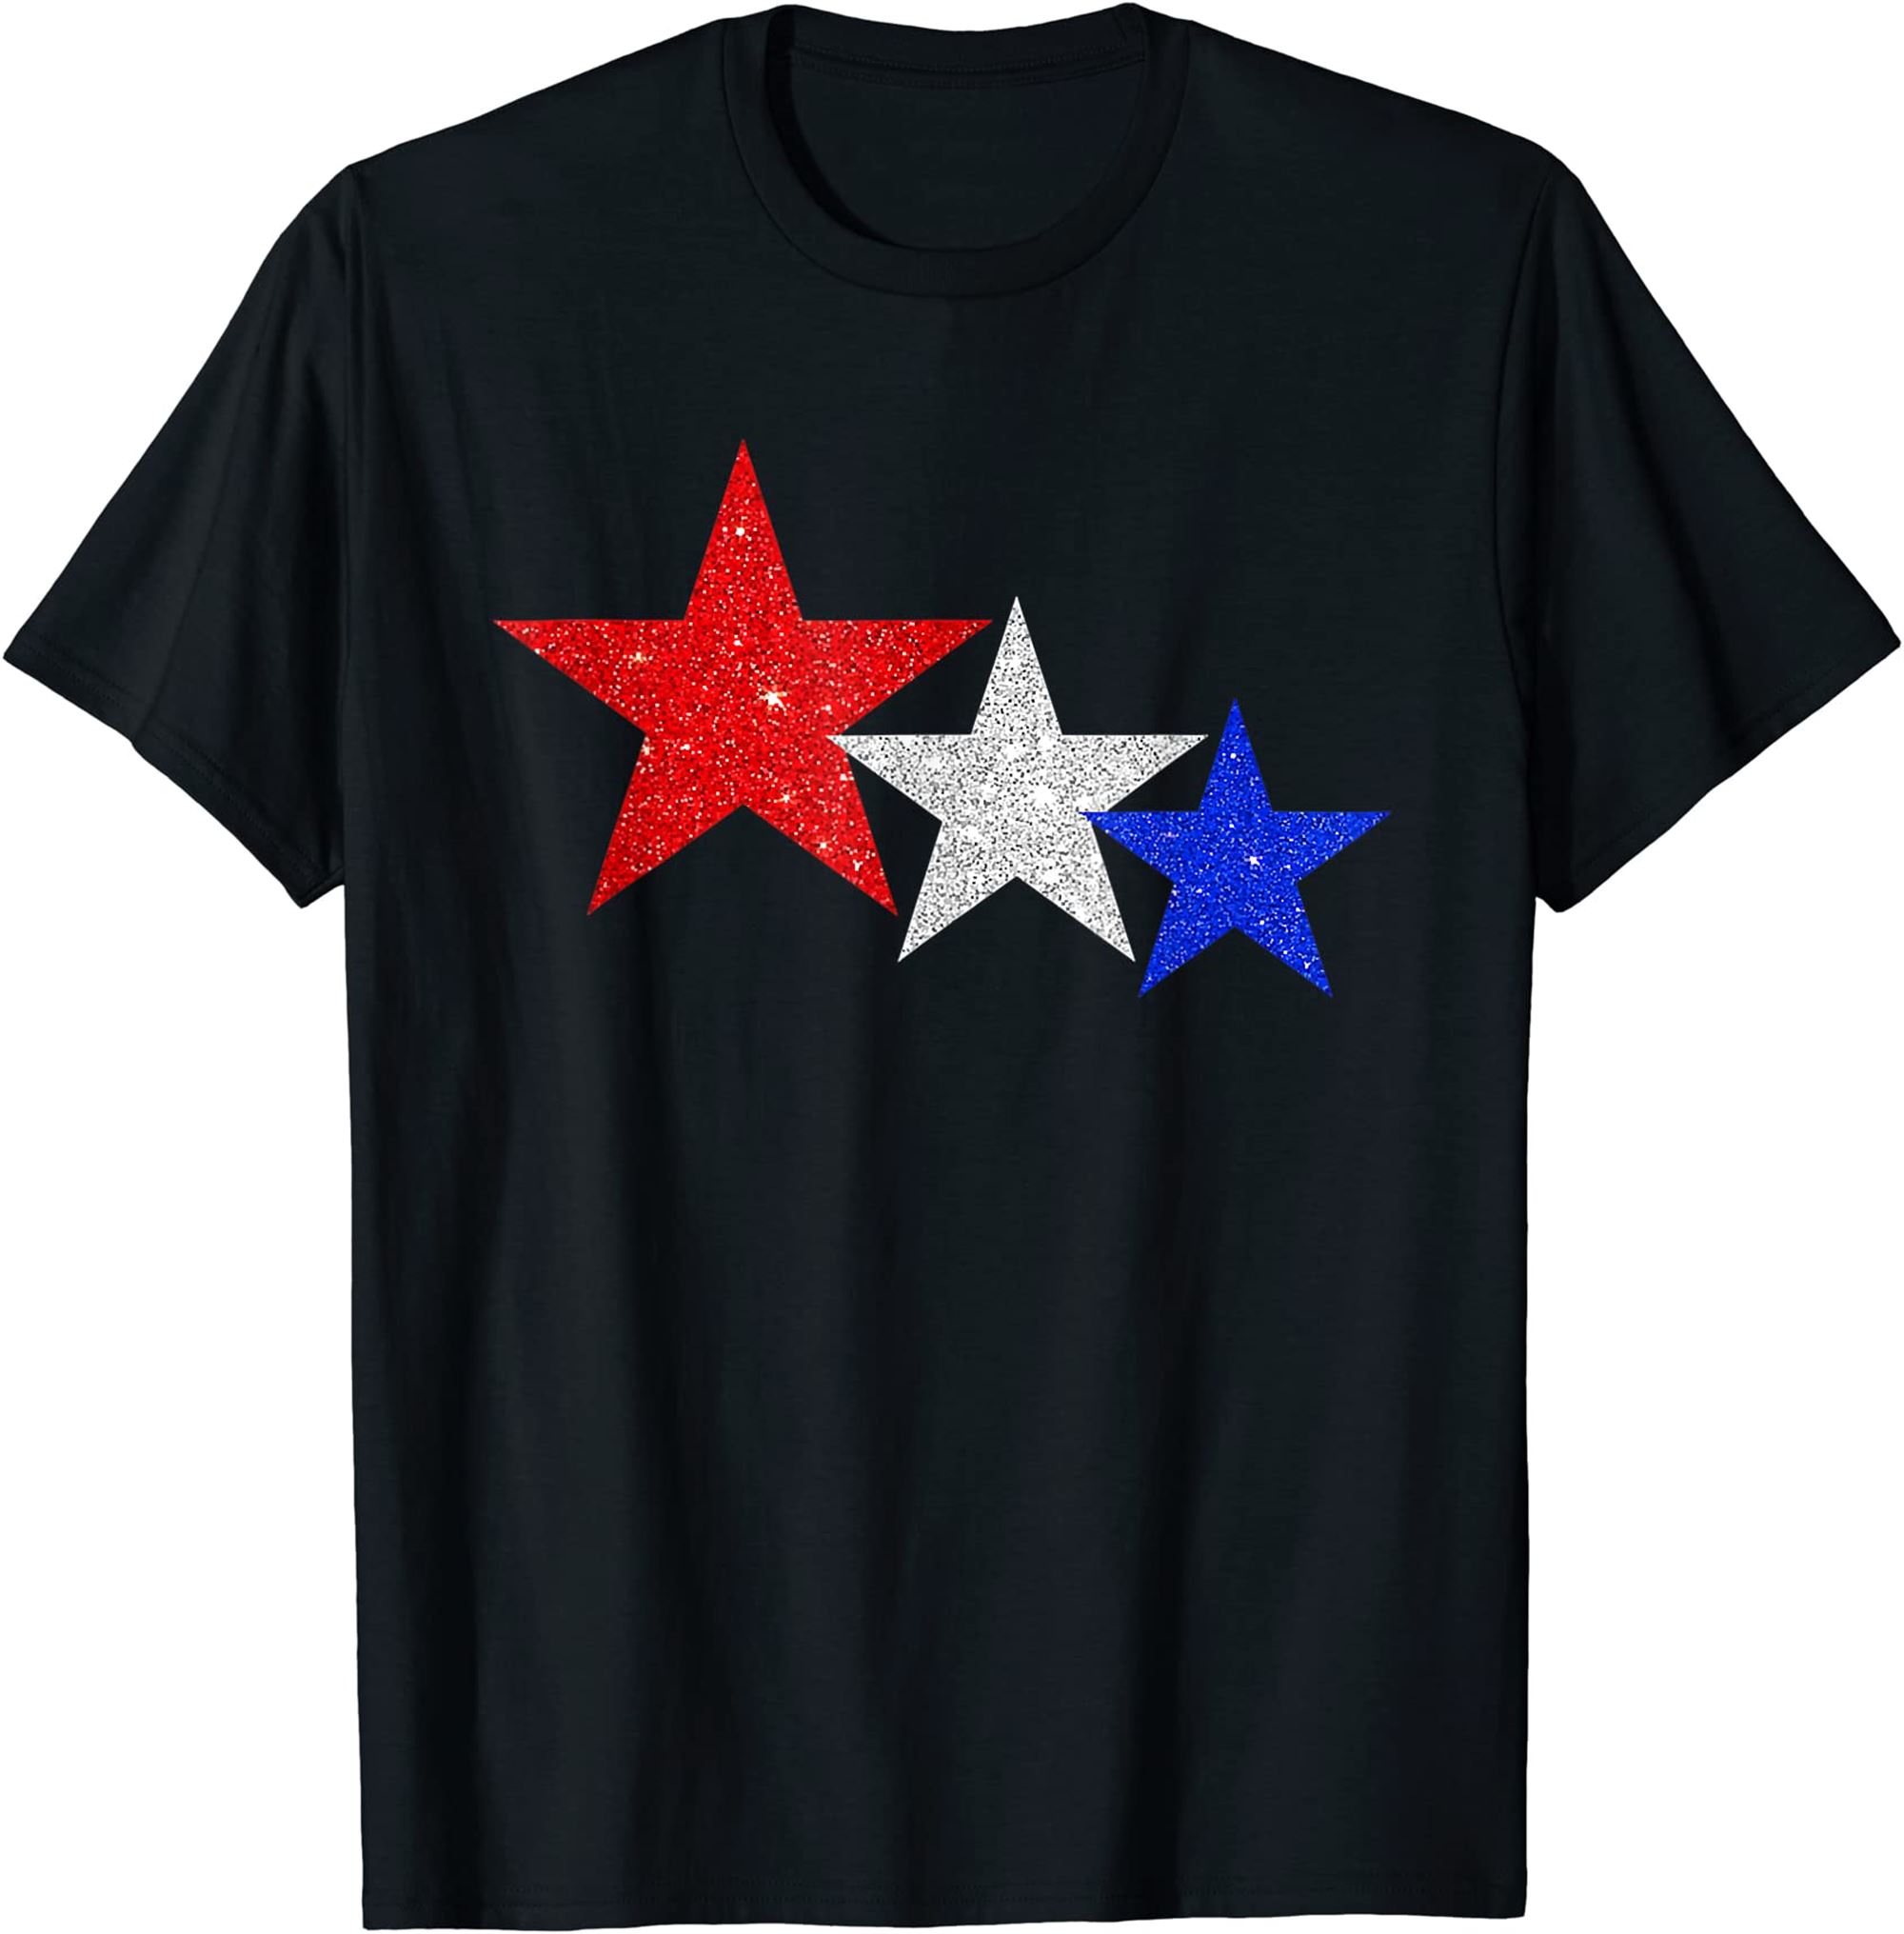 Patriotic Stars Sparkle Red White Blue American 4th Of July T-shirt Full Size Up To 5xl